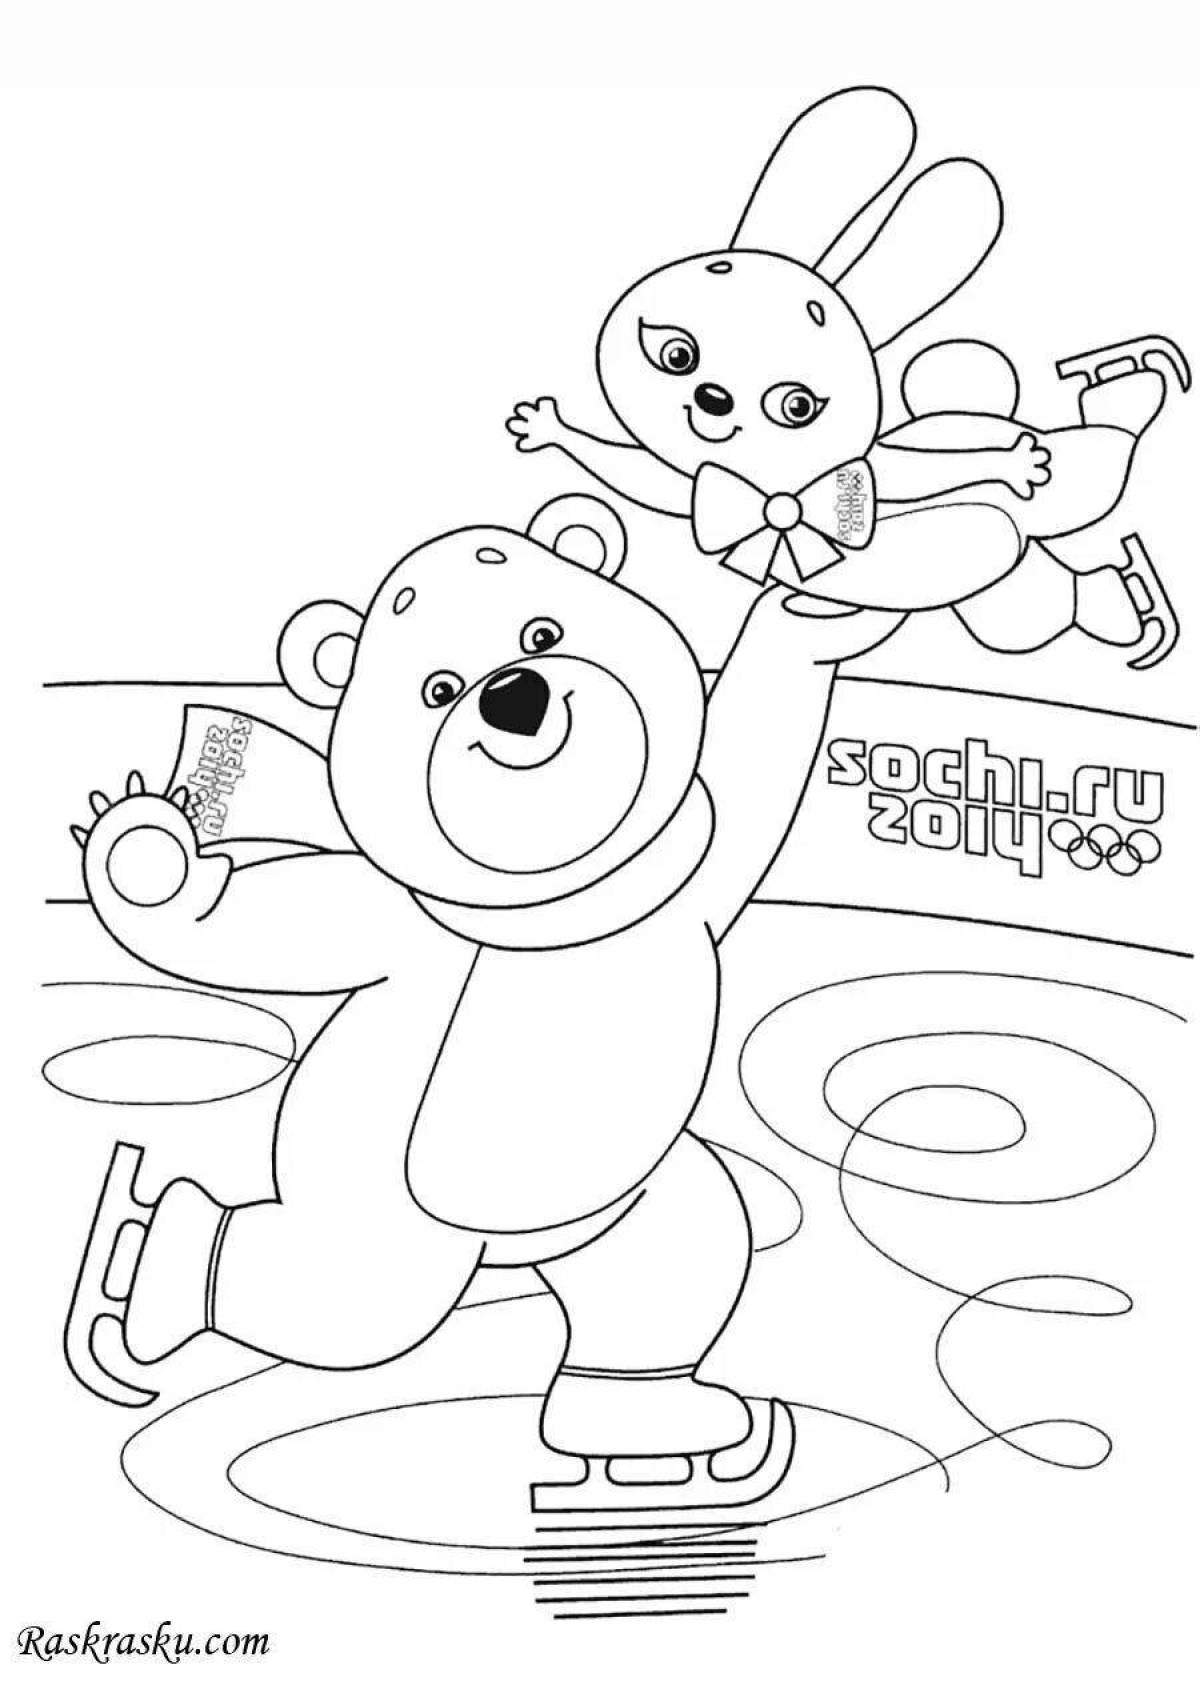 Coloring book gorgeous winter olympiad